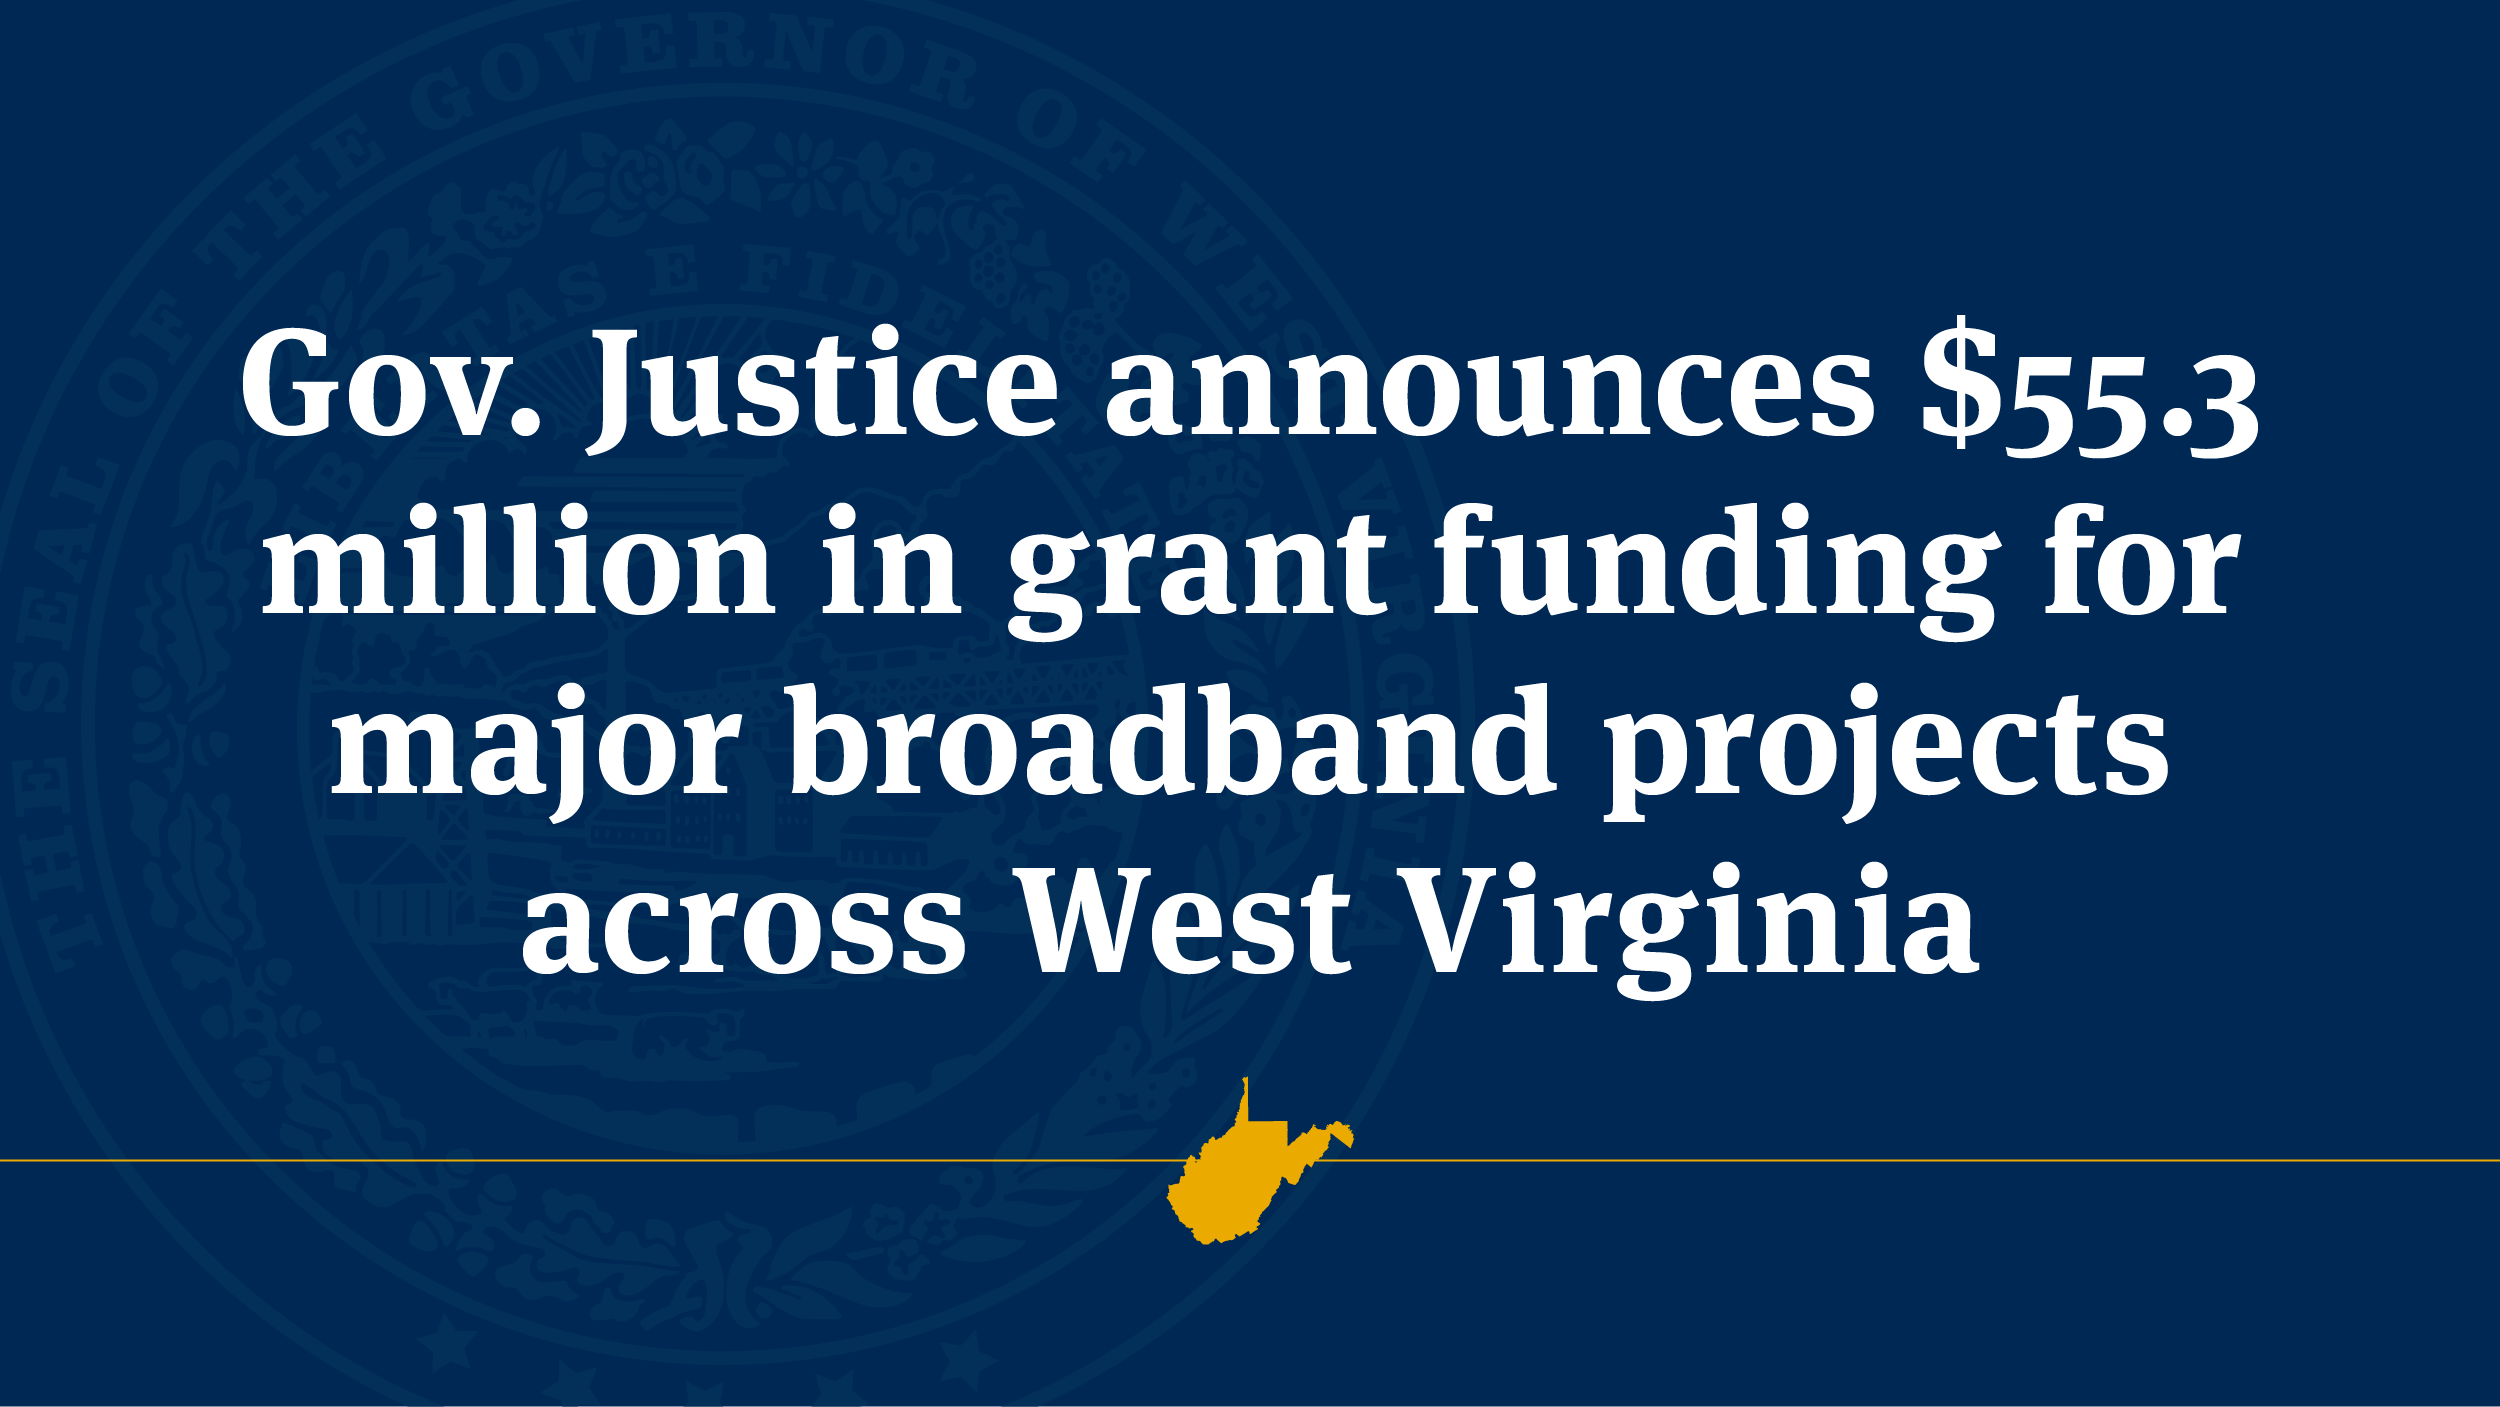 Gov. Justice announces $55.3 million in grant funding for major broadband projects across West Virginia